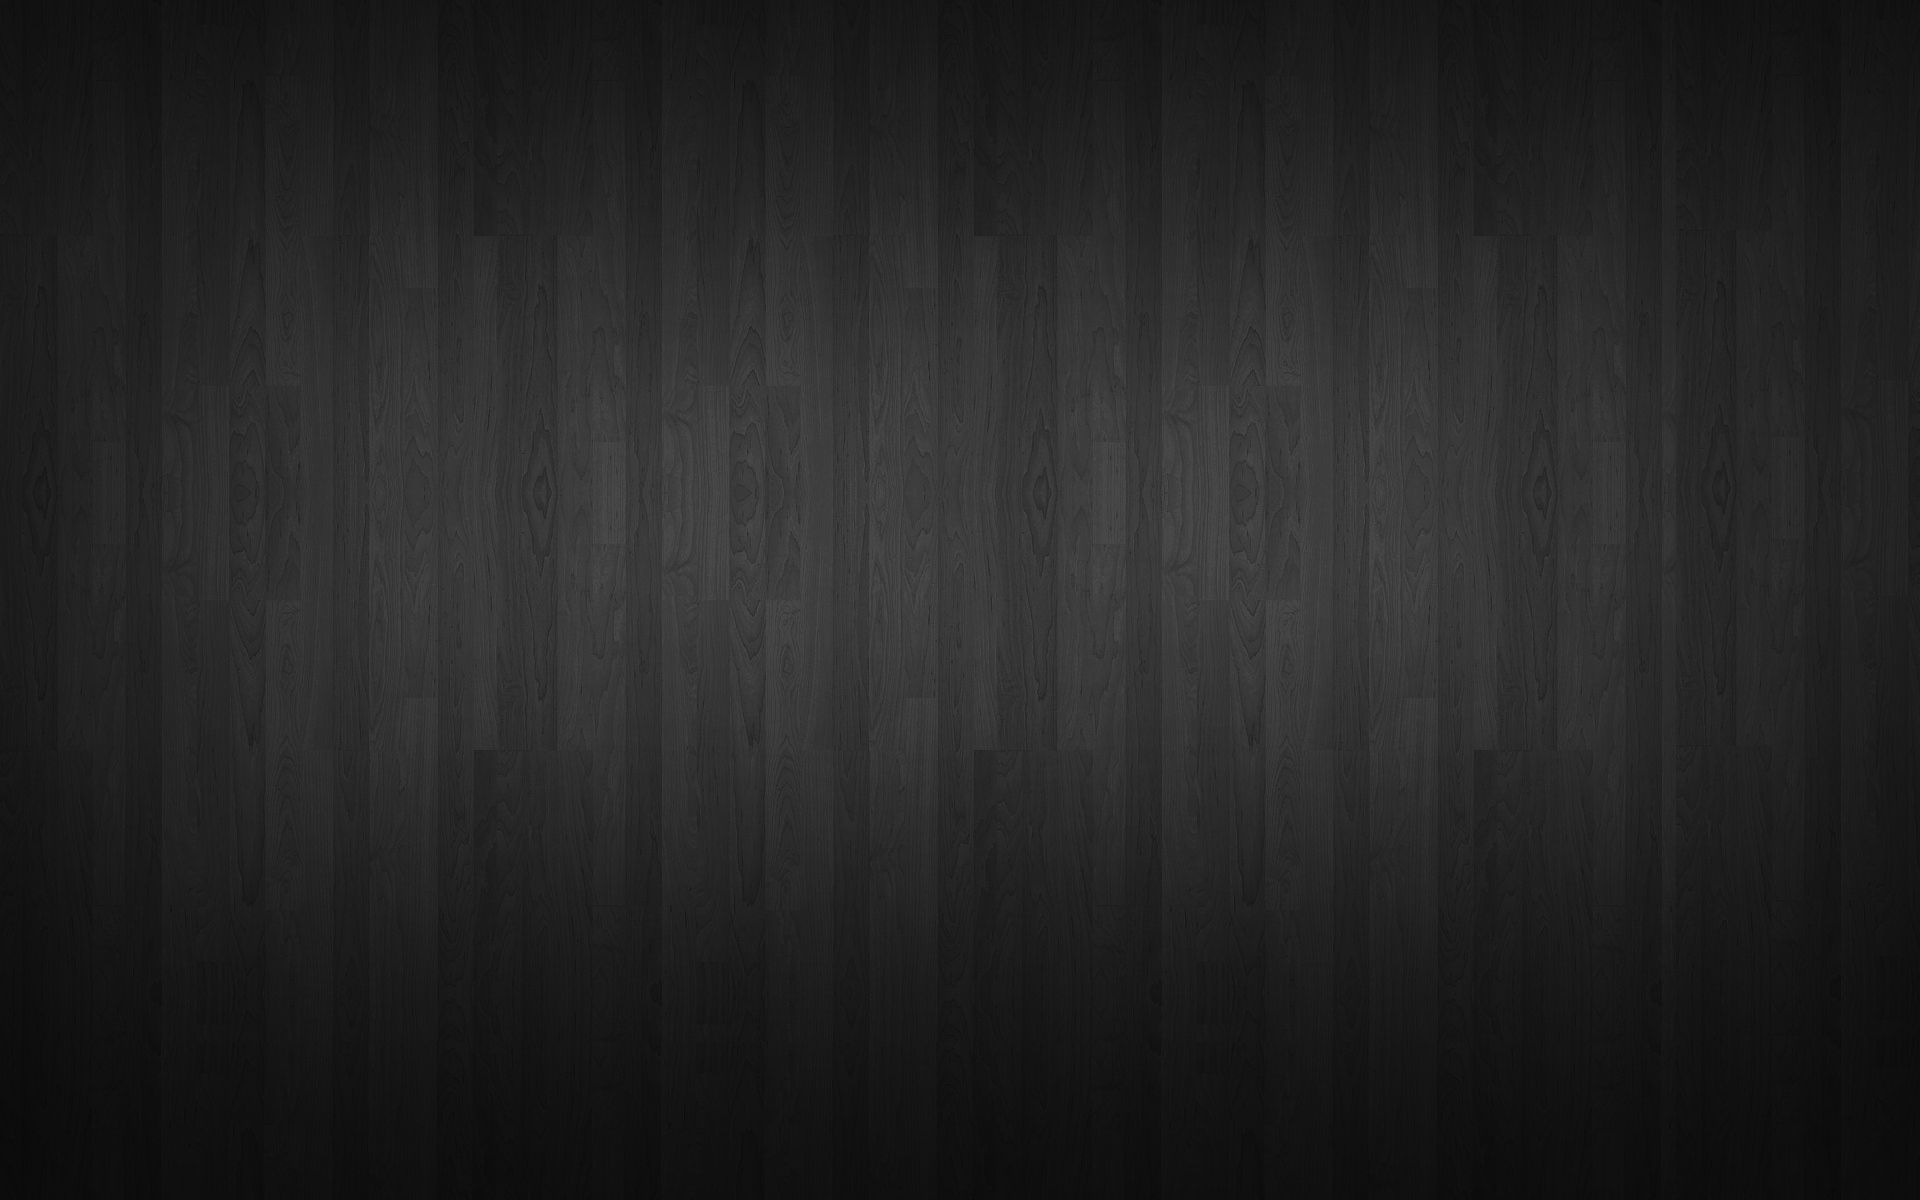 surface, texture, textures, wooden, background, wood, bw, chb, planks, board